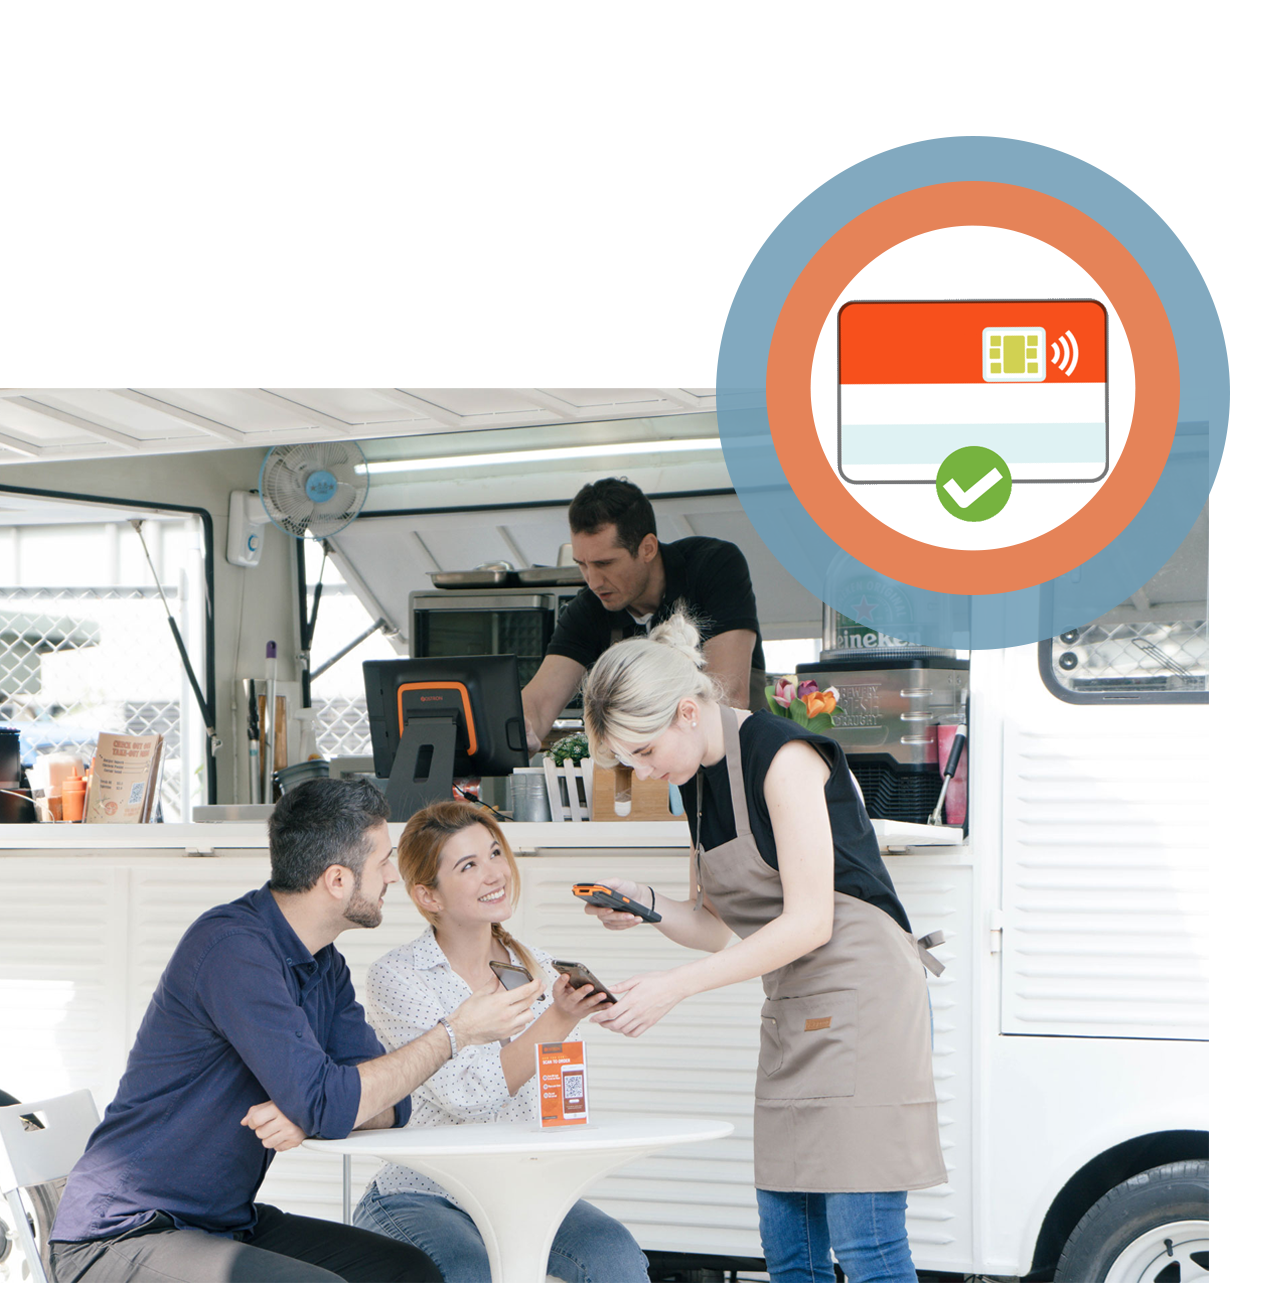 postron pos system and handheld pos devices for food trucks